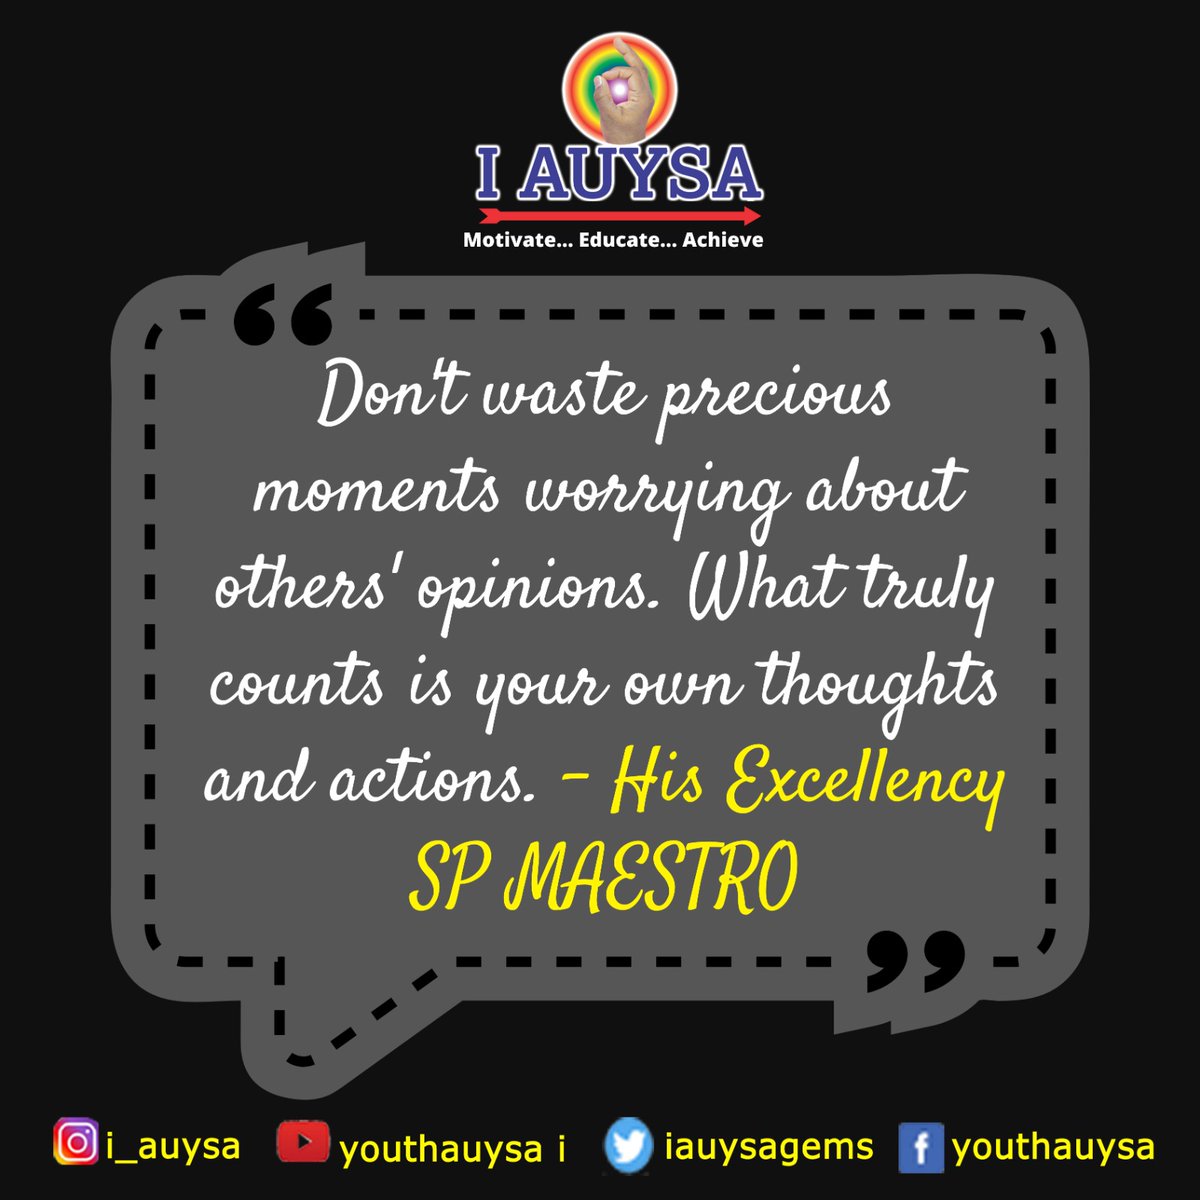 #iauysa #iauysagems #spmaestro #hisexcellencyspmaestroquotes #youth #perfect #success #motivation #quotes #life #personalitydevelopment #thoughts #actions